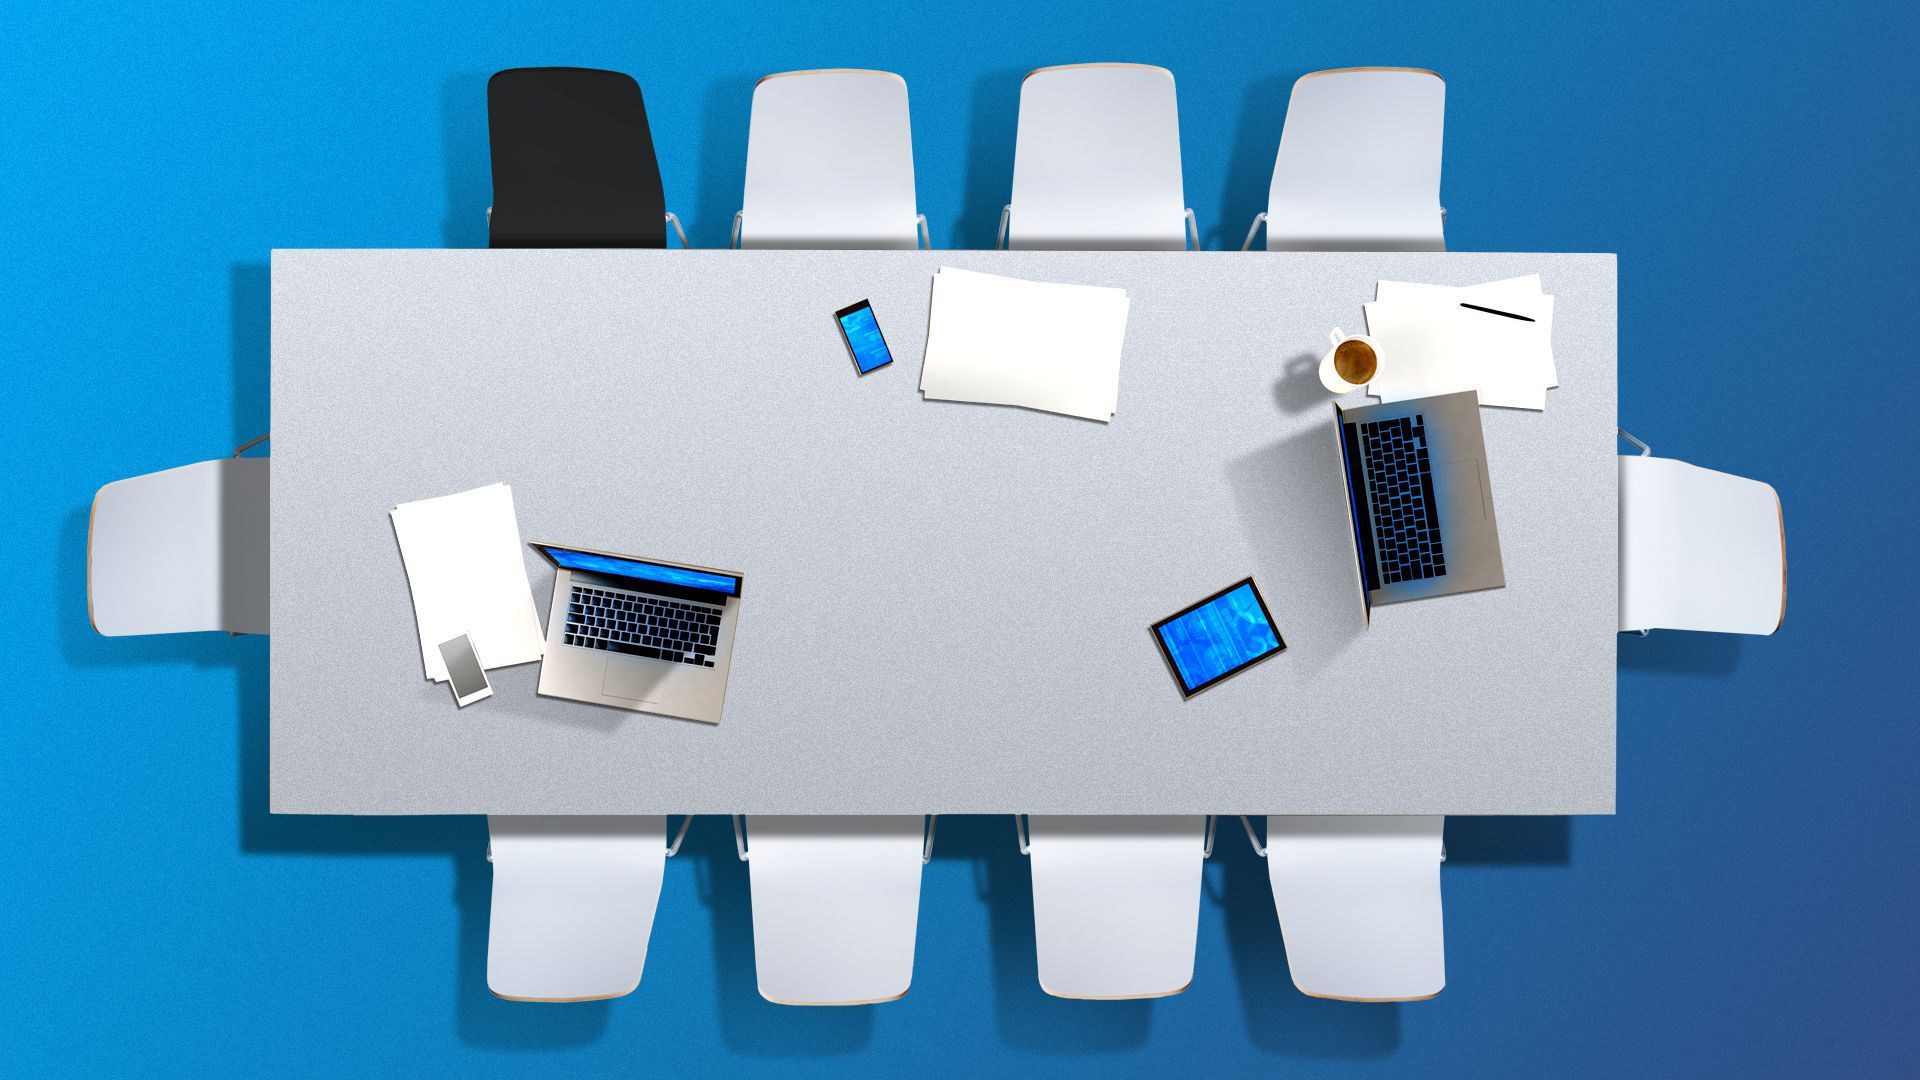 A conference table with technology